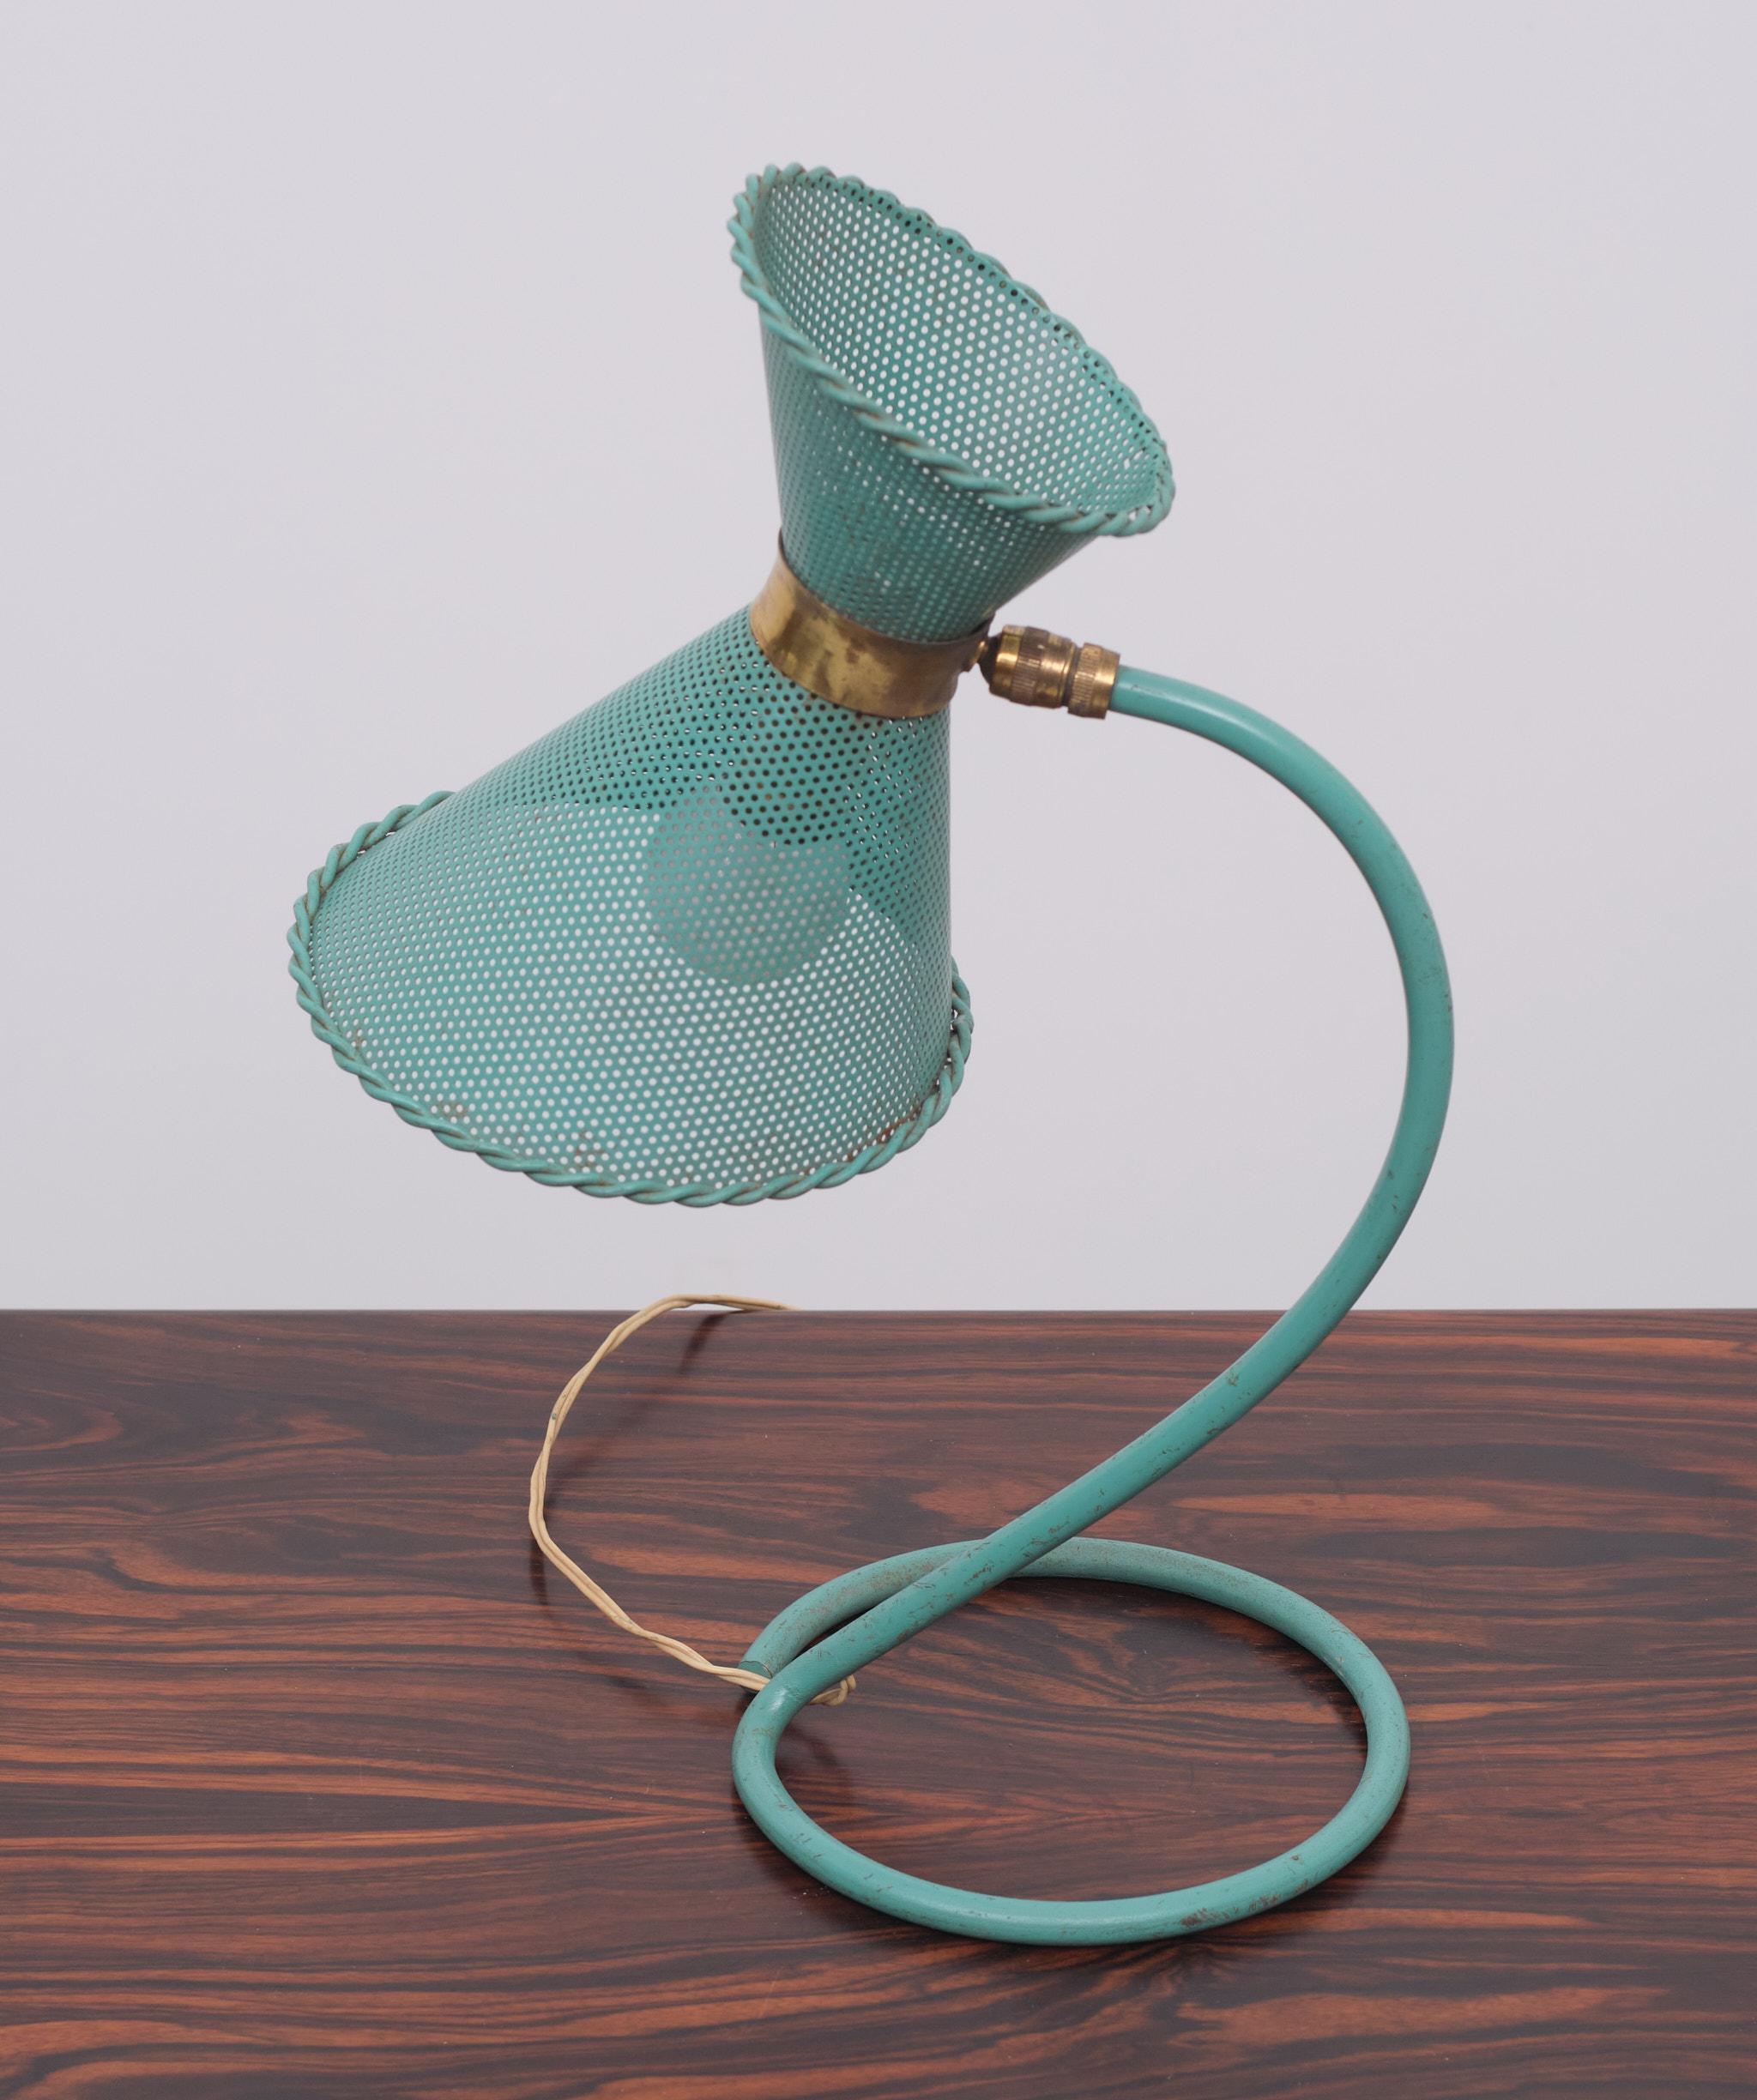 Rare, French table lamp designed by Mathieu Matégot and executed by Atelier-Matégot. A beautiful shade in the form of a diabolo, perforated metal where Matégot was so famous for. The lamp is in its original condition, and color which means there are